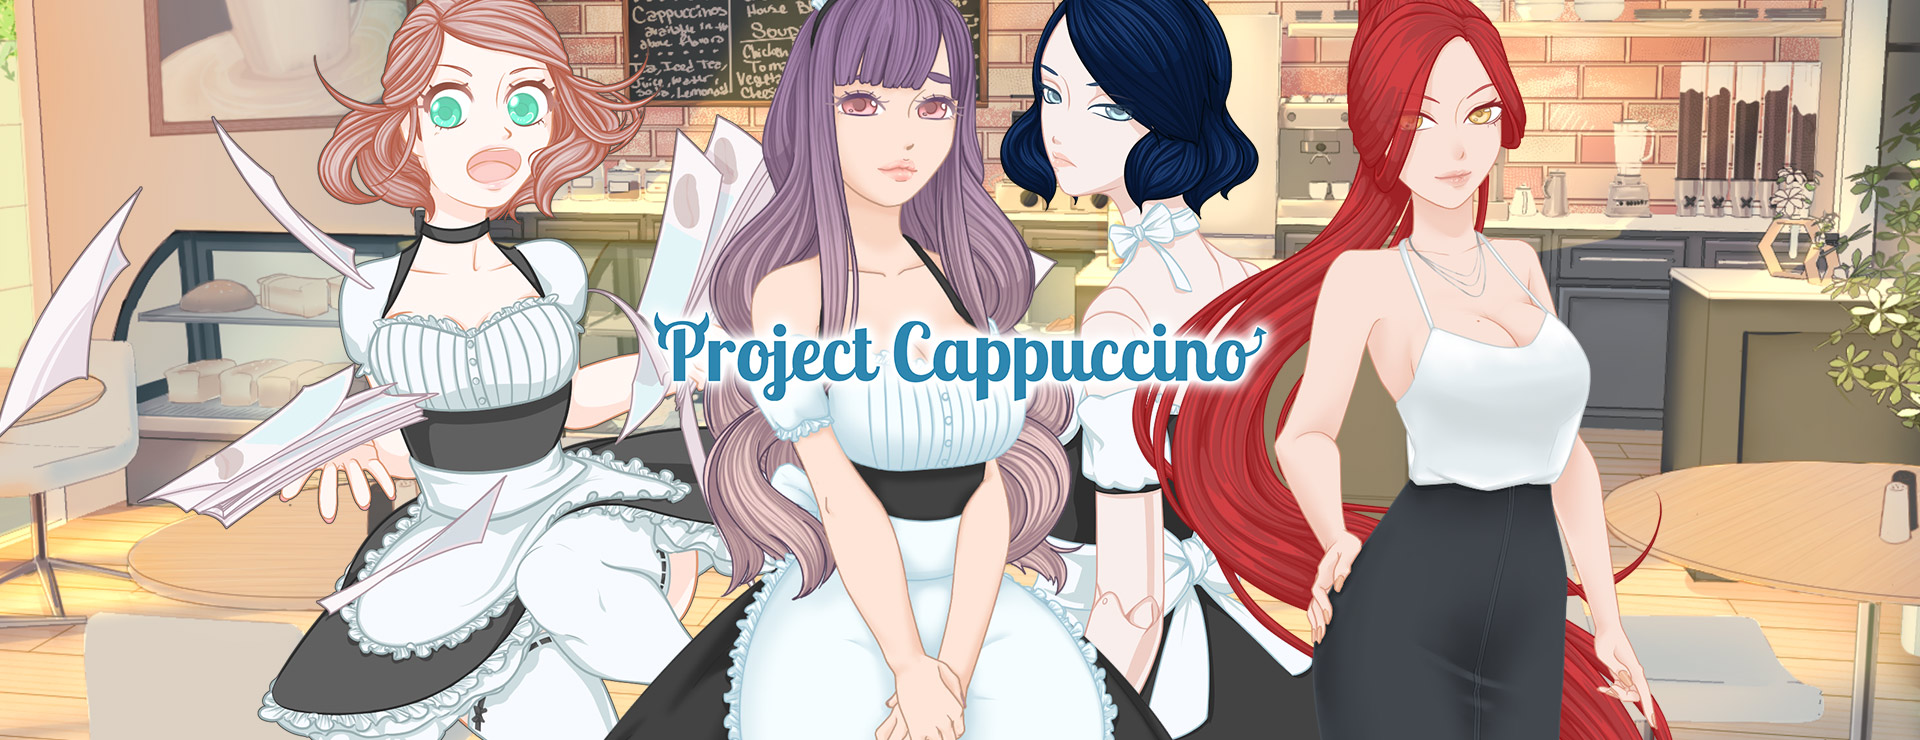 Project Cappuccino - Visual Novel Game